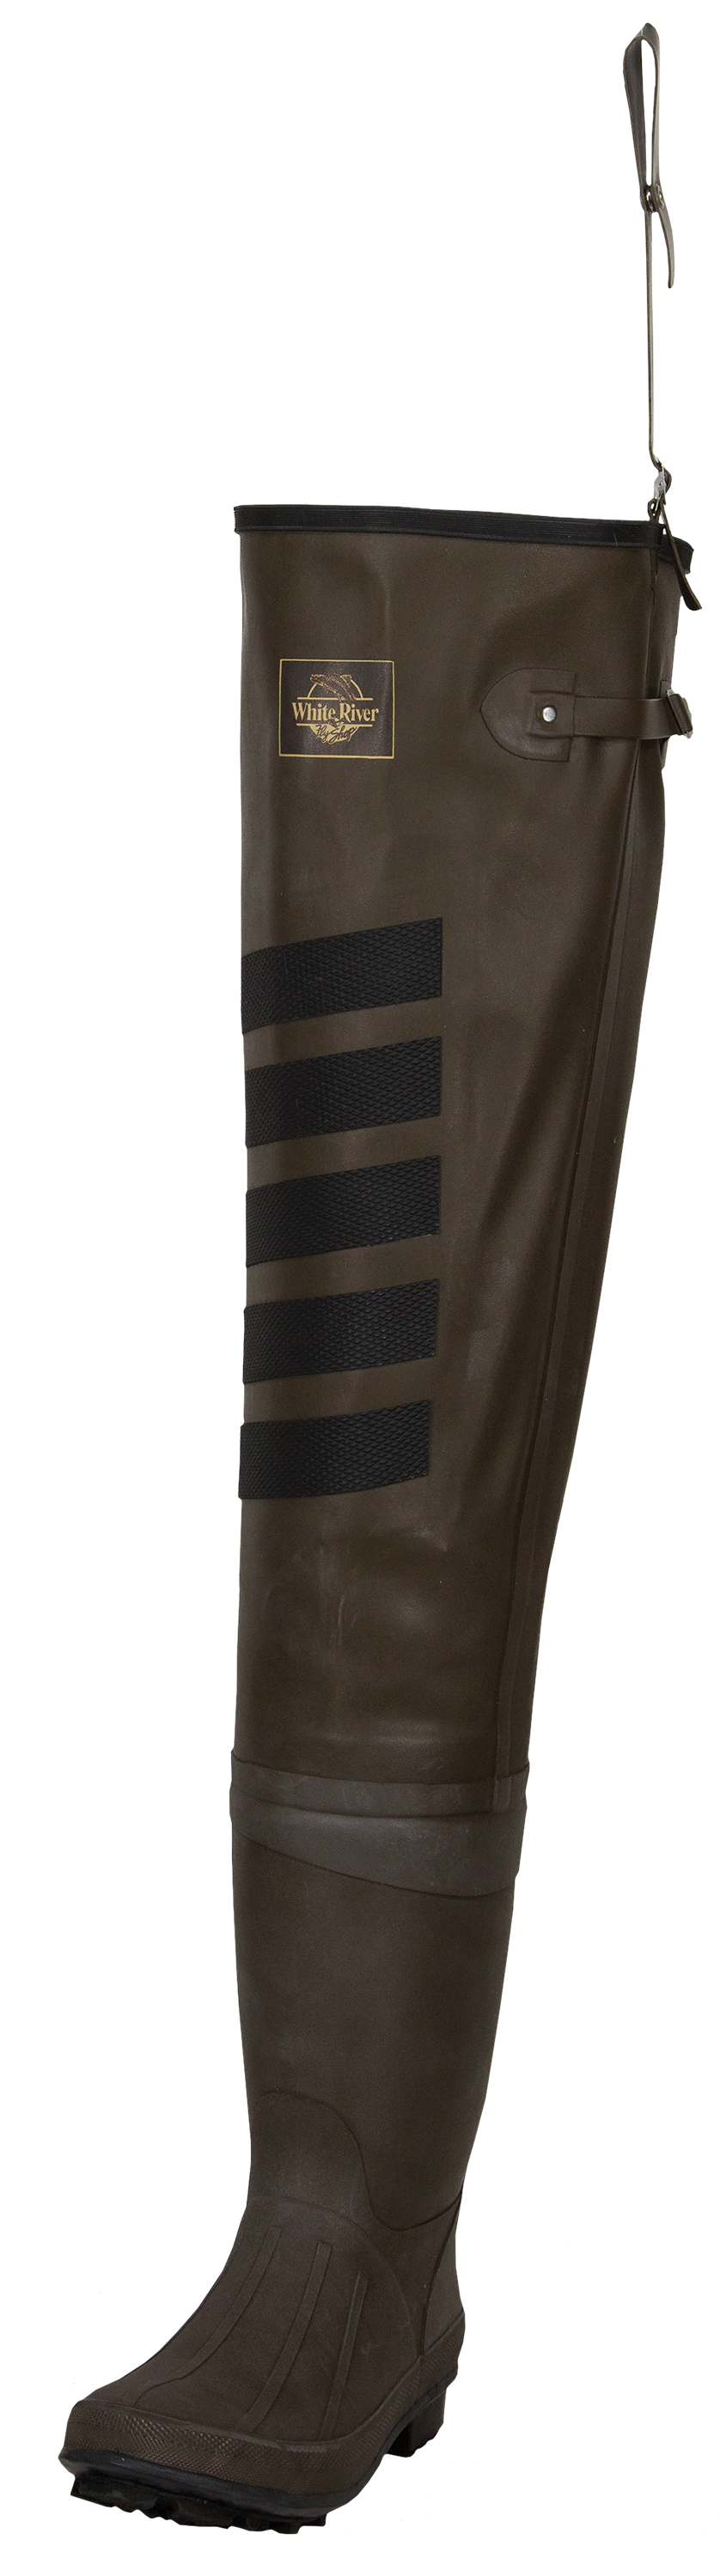 White River Fly Shop Waterproof Rubber Boot-Foot Hip Waders for Men - Brown - 14